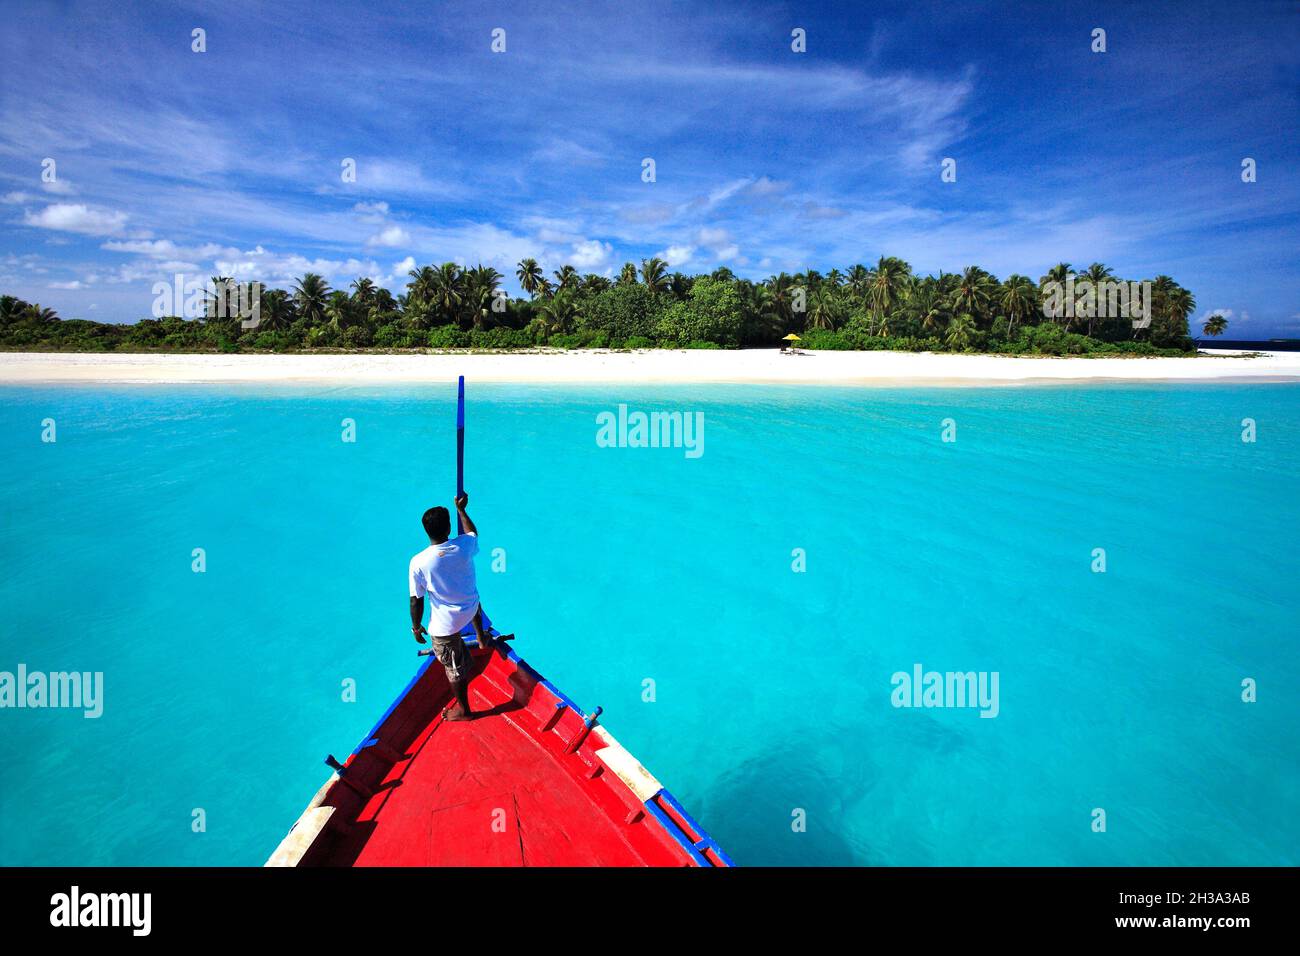 MALDIVE ARCHIPELAGO, DHAALU ATOLL, ARRIVING ON THE ISLAND CASTEWAY (SHIPWRECK) PRIVATE ISLAND WITH A JUST ONE LUXURY TENTED ACCOMMODATION (MANAGED BY Stock Photo